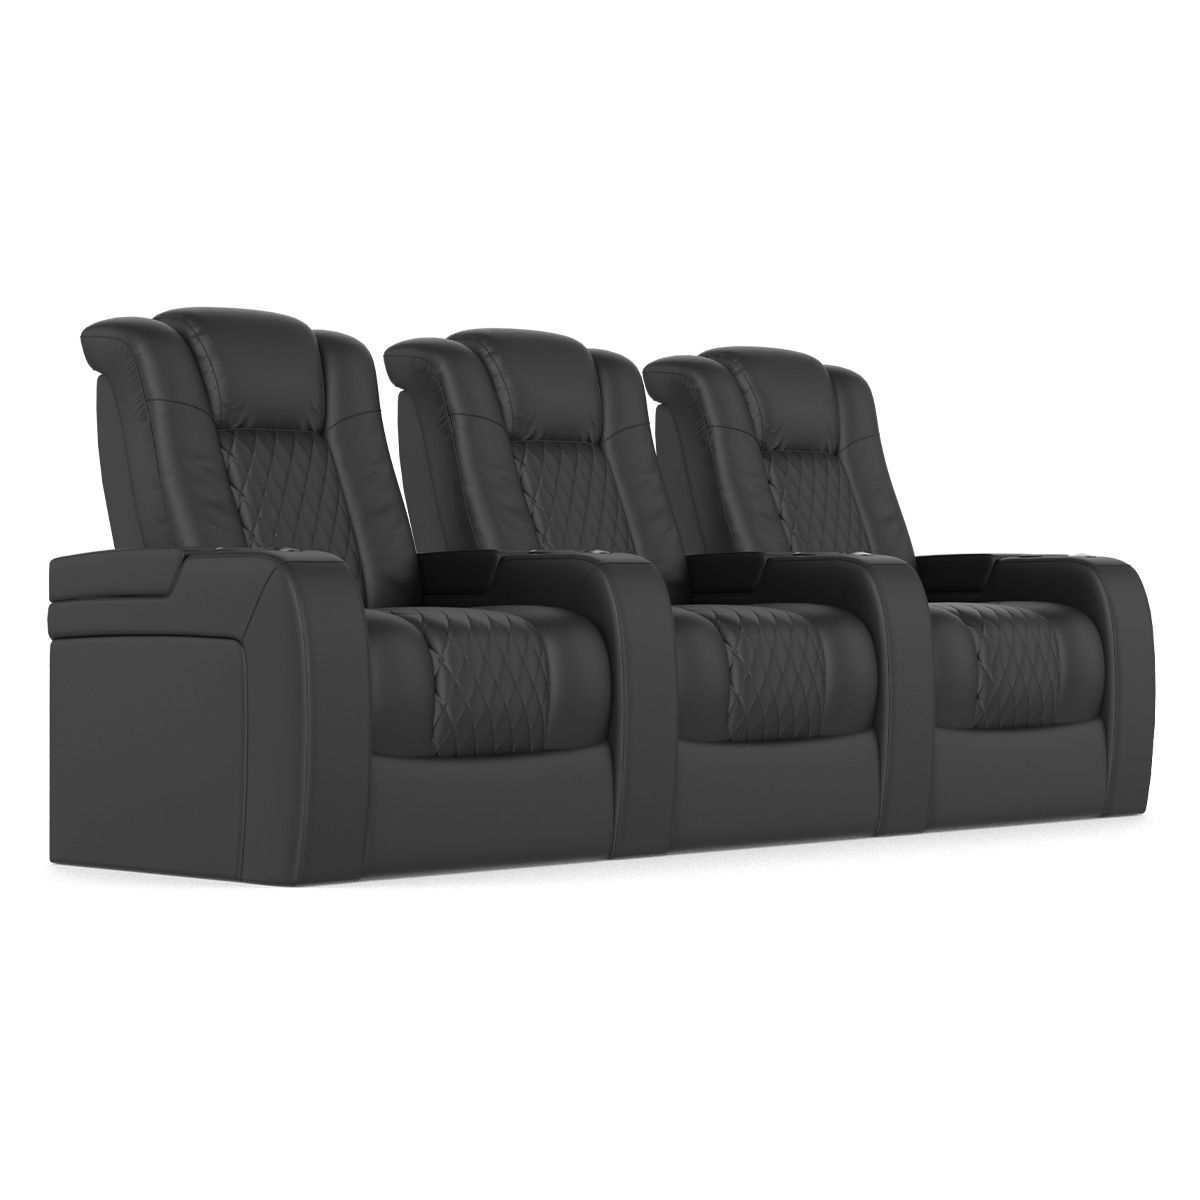 Audio Advice Revelation Home Theater Seating - angled front view of 3 chair row